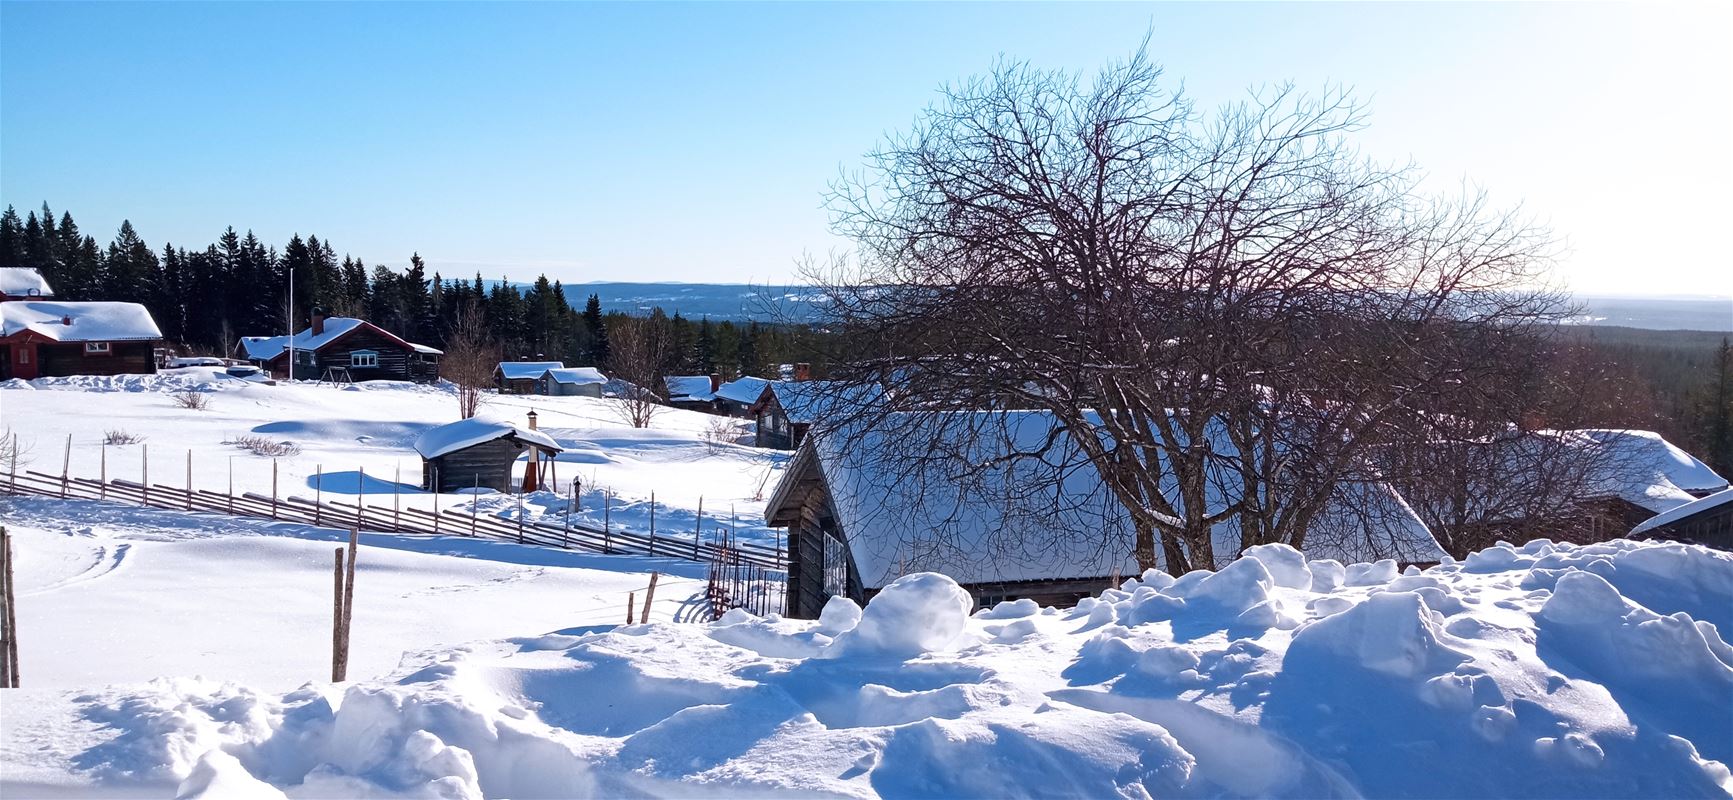 Snow-covered meadows and timberhouses with snow on the roofs.